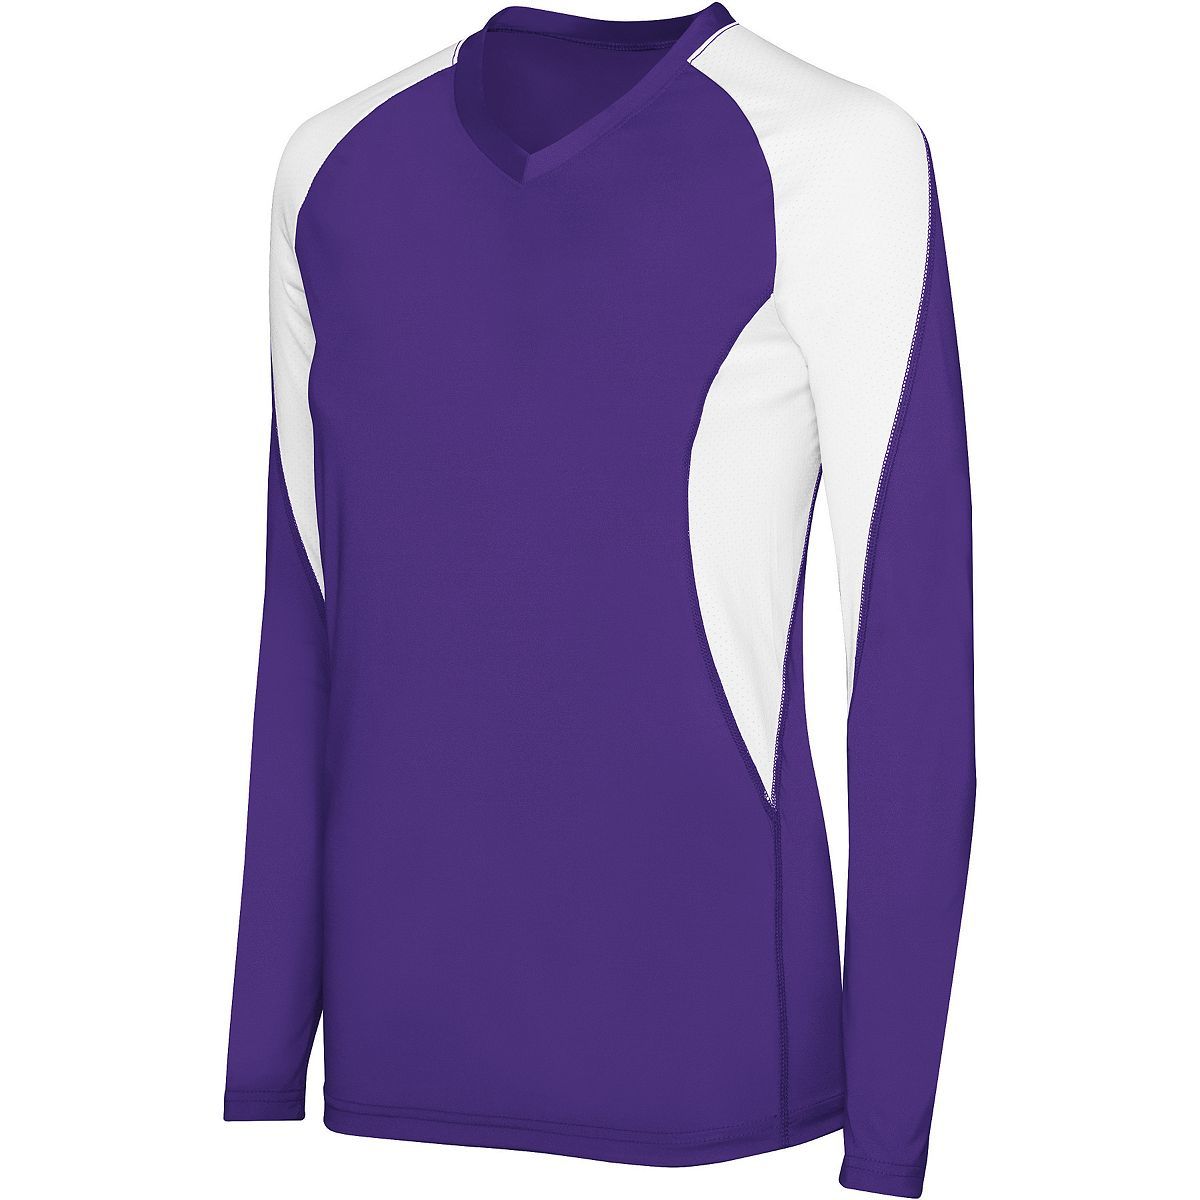 High 5 Girls Long Sleeve Court Jersey in Purple/White  -Part of the Girls, High5-Products, Volleyball, Girls-Jersey, Shirts product lines at KanaleyCreations.com